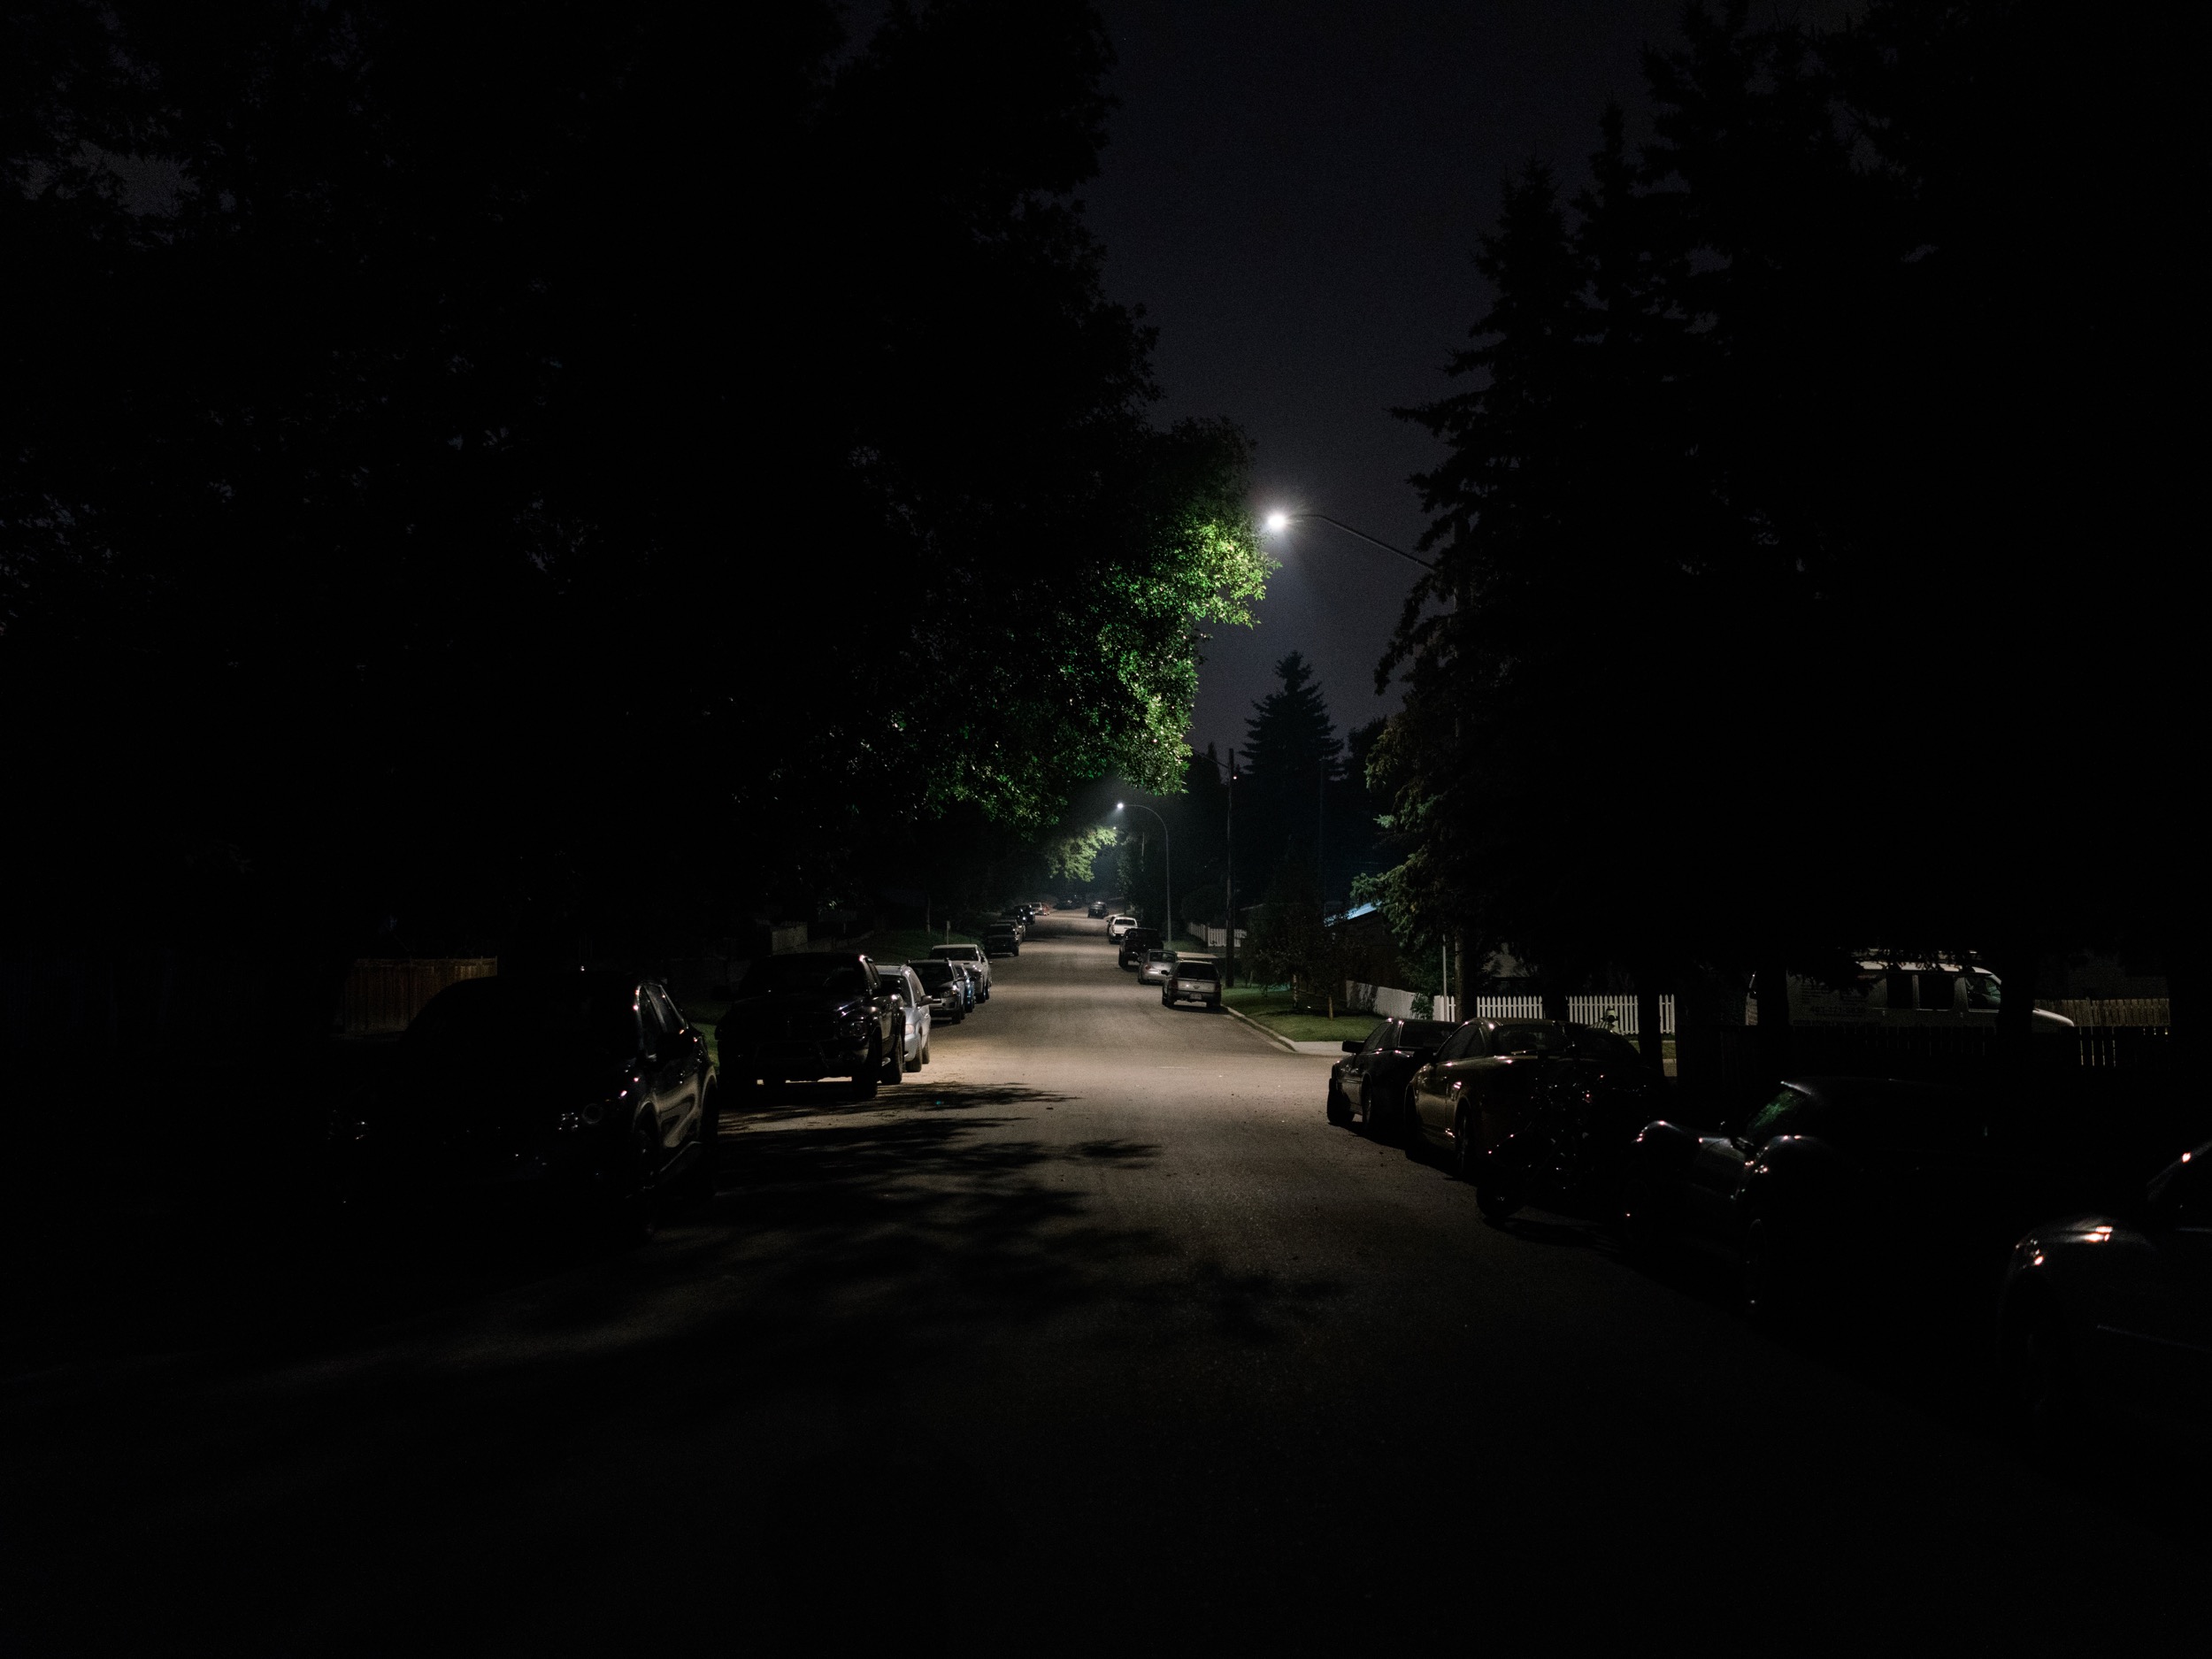  This particular street didn't have a sidewalk so I walked down the middle of the road. I loved the canopy of trees with the streetlights dotting the way forward. When it's this late at night, the roads are quiet and the traffic is rare.&nbsp; 